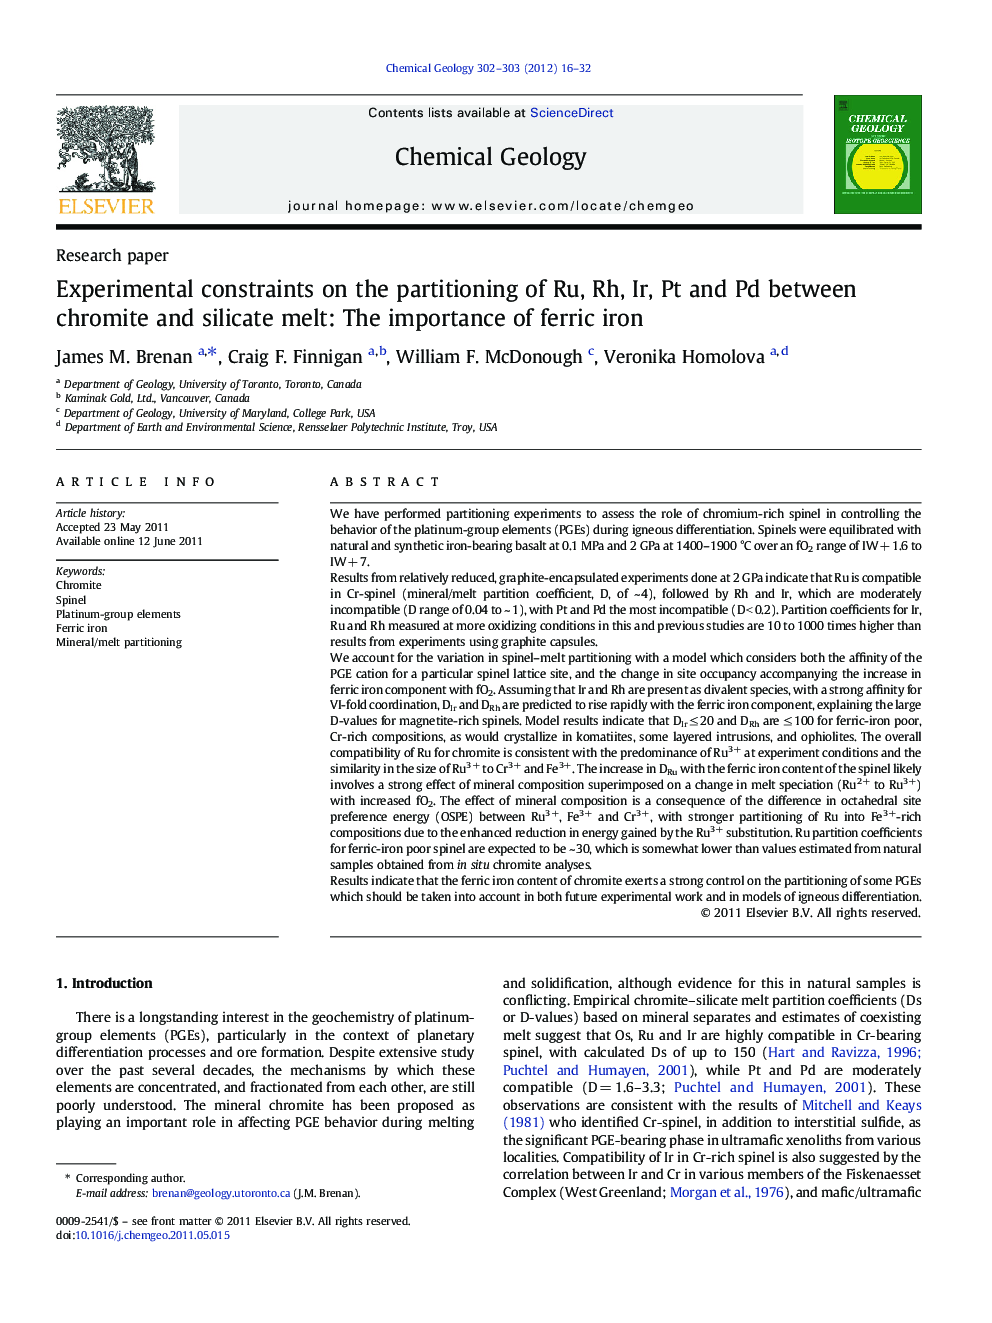 Experimental constraints on the partitioning of Ru, Rh, Ir, Pt and Pd between chromite and silicate melt: The importance of ferric iron